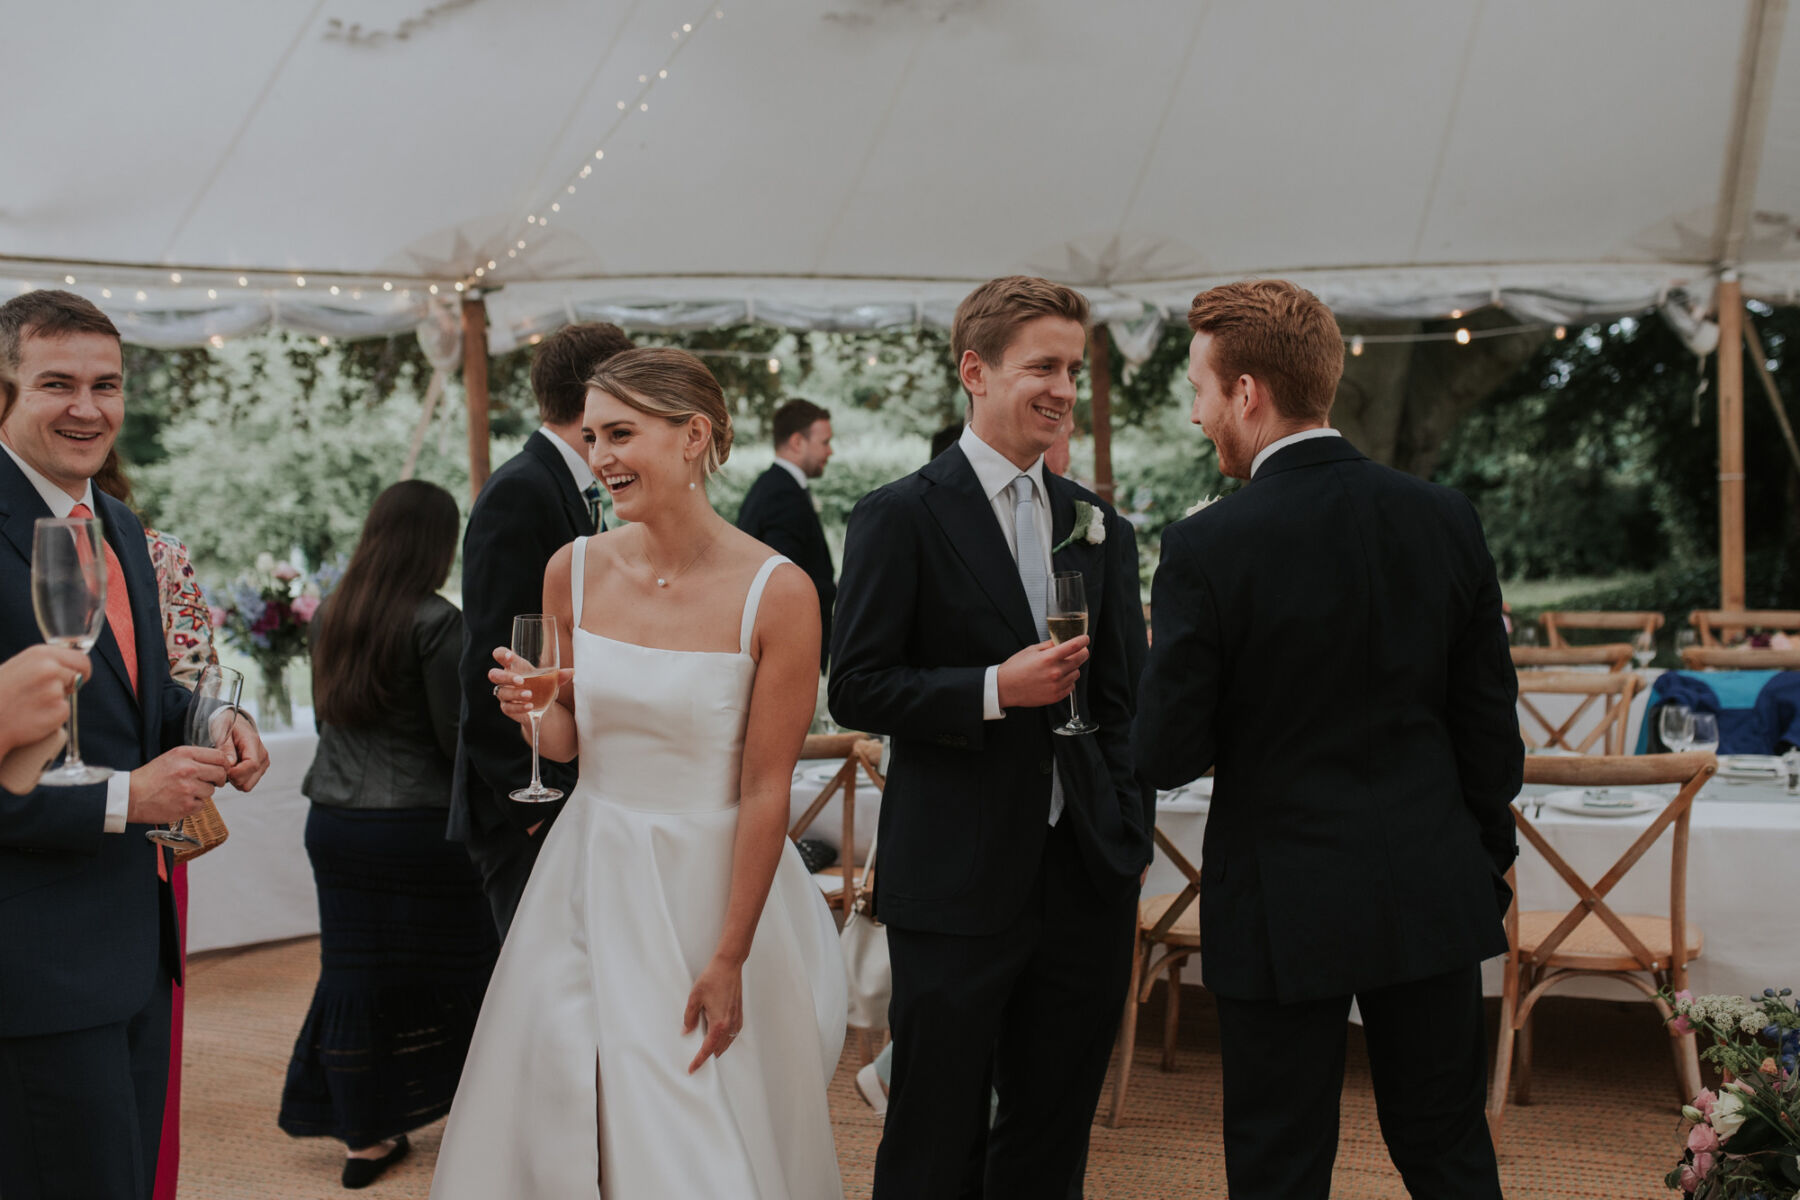 Bride inside a marquee holding a glass of champagne